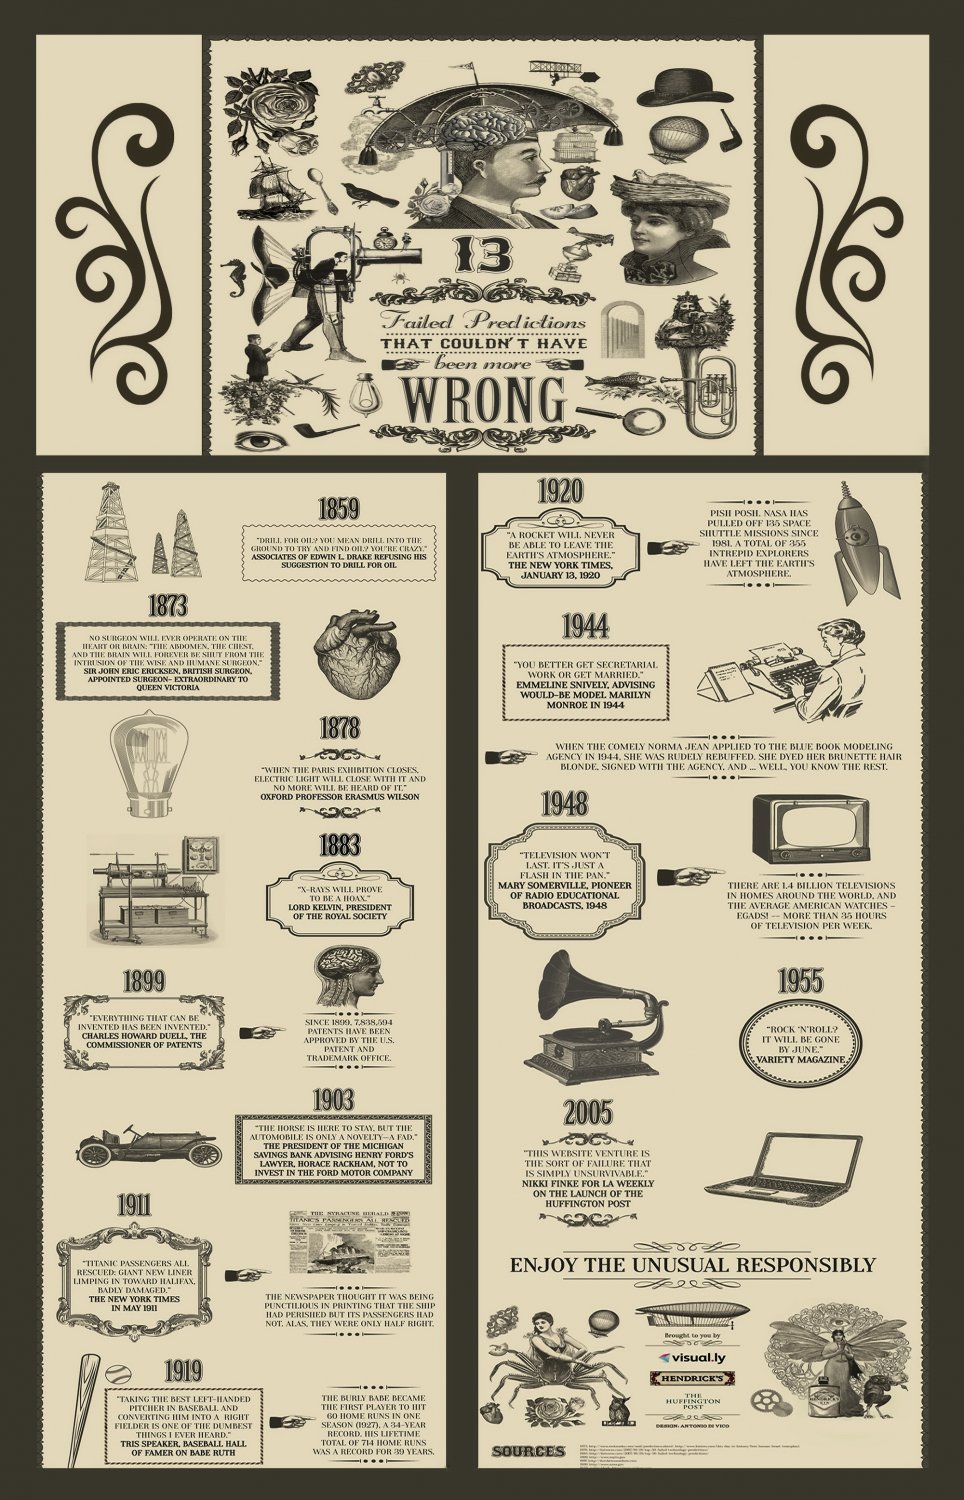 13 Failed Predictions that Couldn't have been more Wrong Chart . 18"x28" (45cm/70cm) Poster